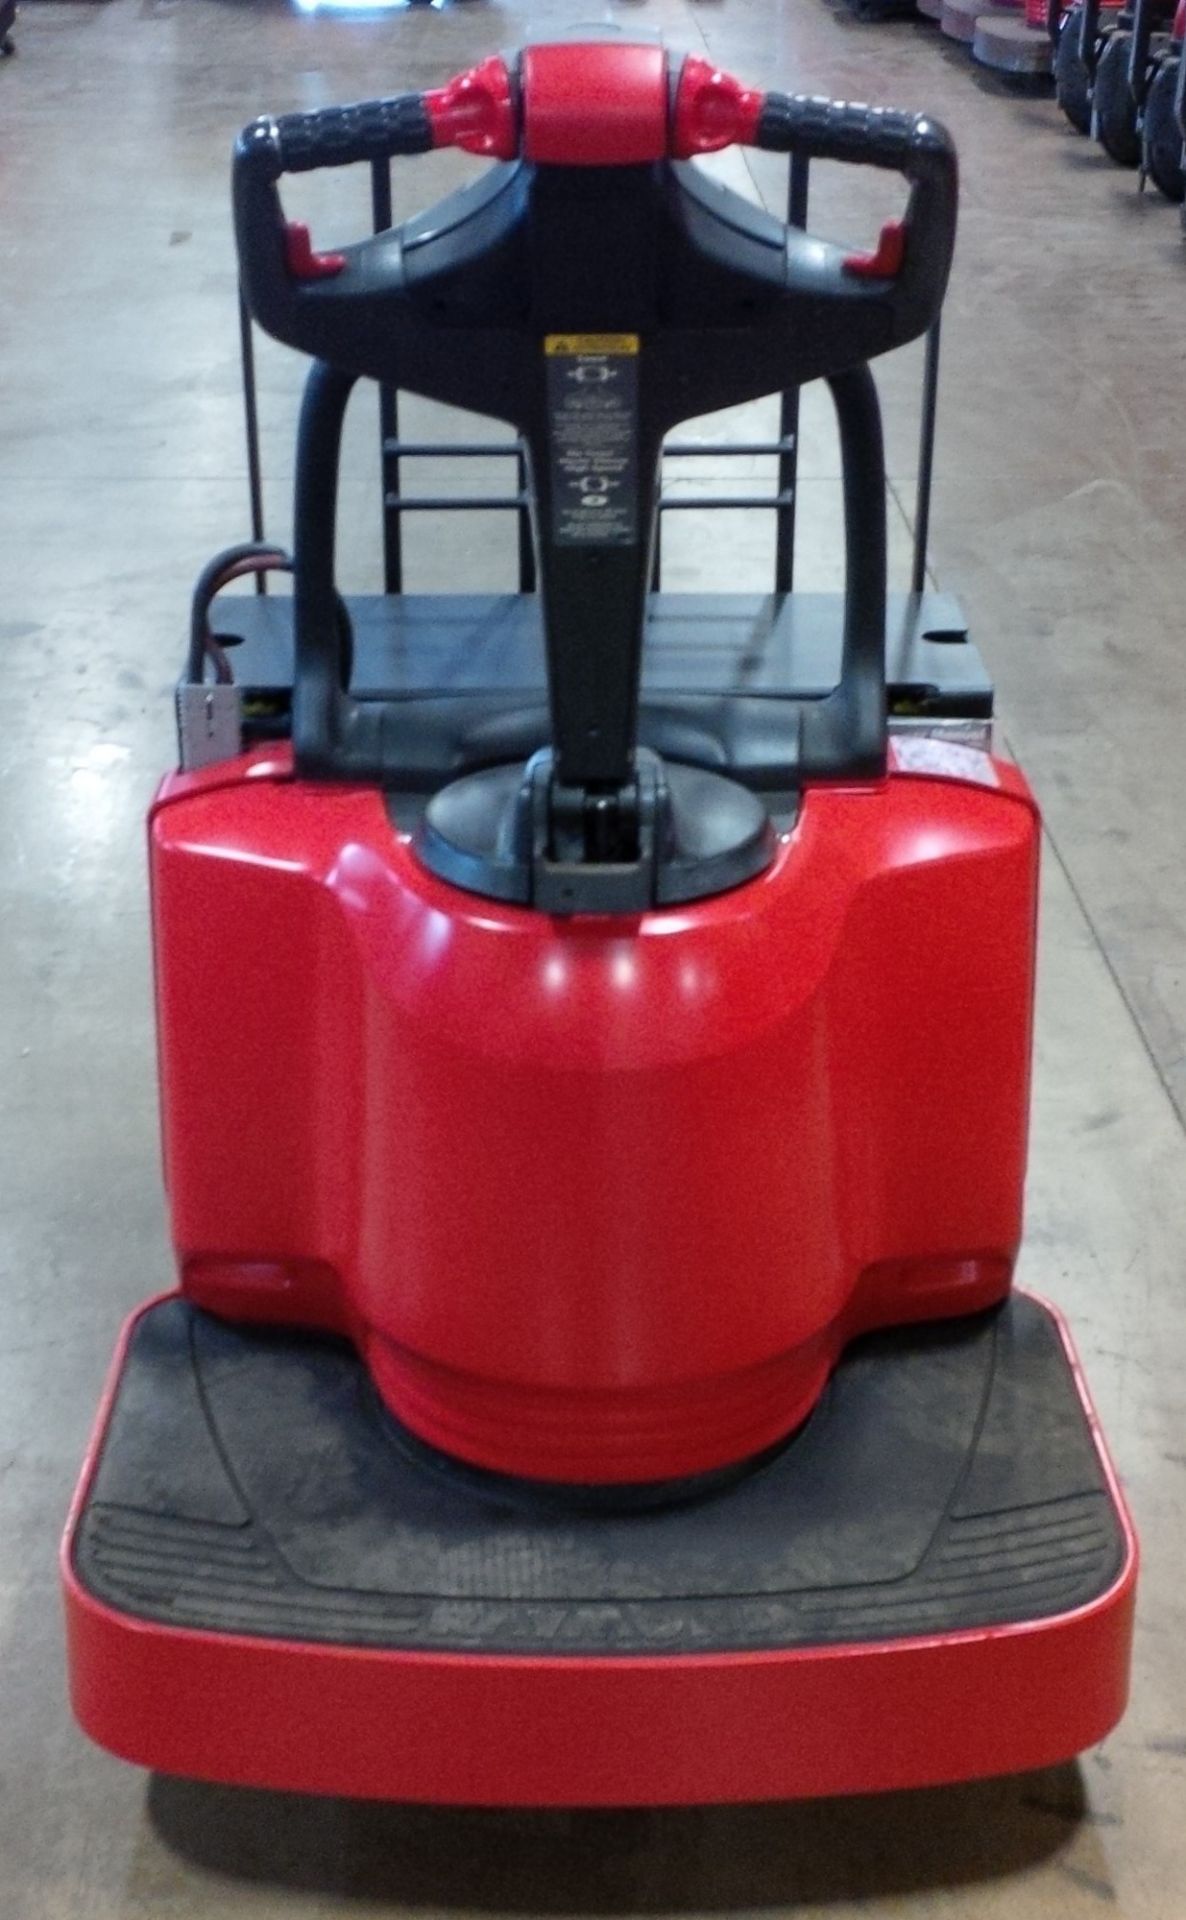 RAYMOND (2009) 8400 24V ELECTRIC RIDE-ON PALLET JACK WITH 6000 LB. CAPACITY, S/N: 840-09-83533 (UNIT - Image 2 of 2